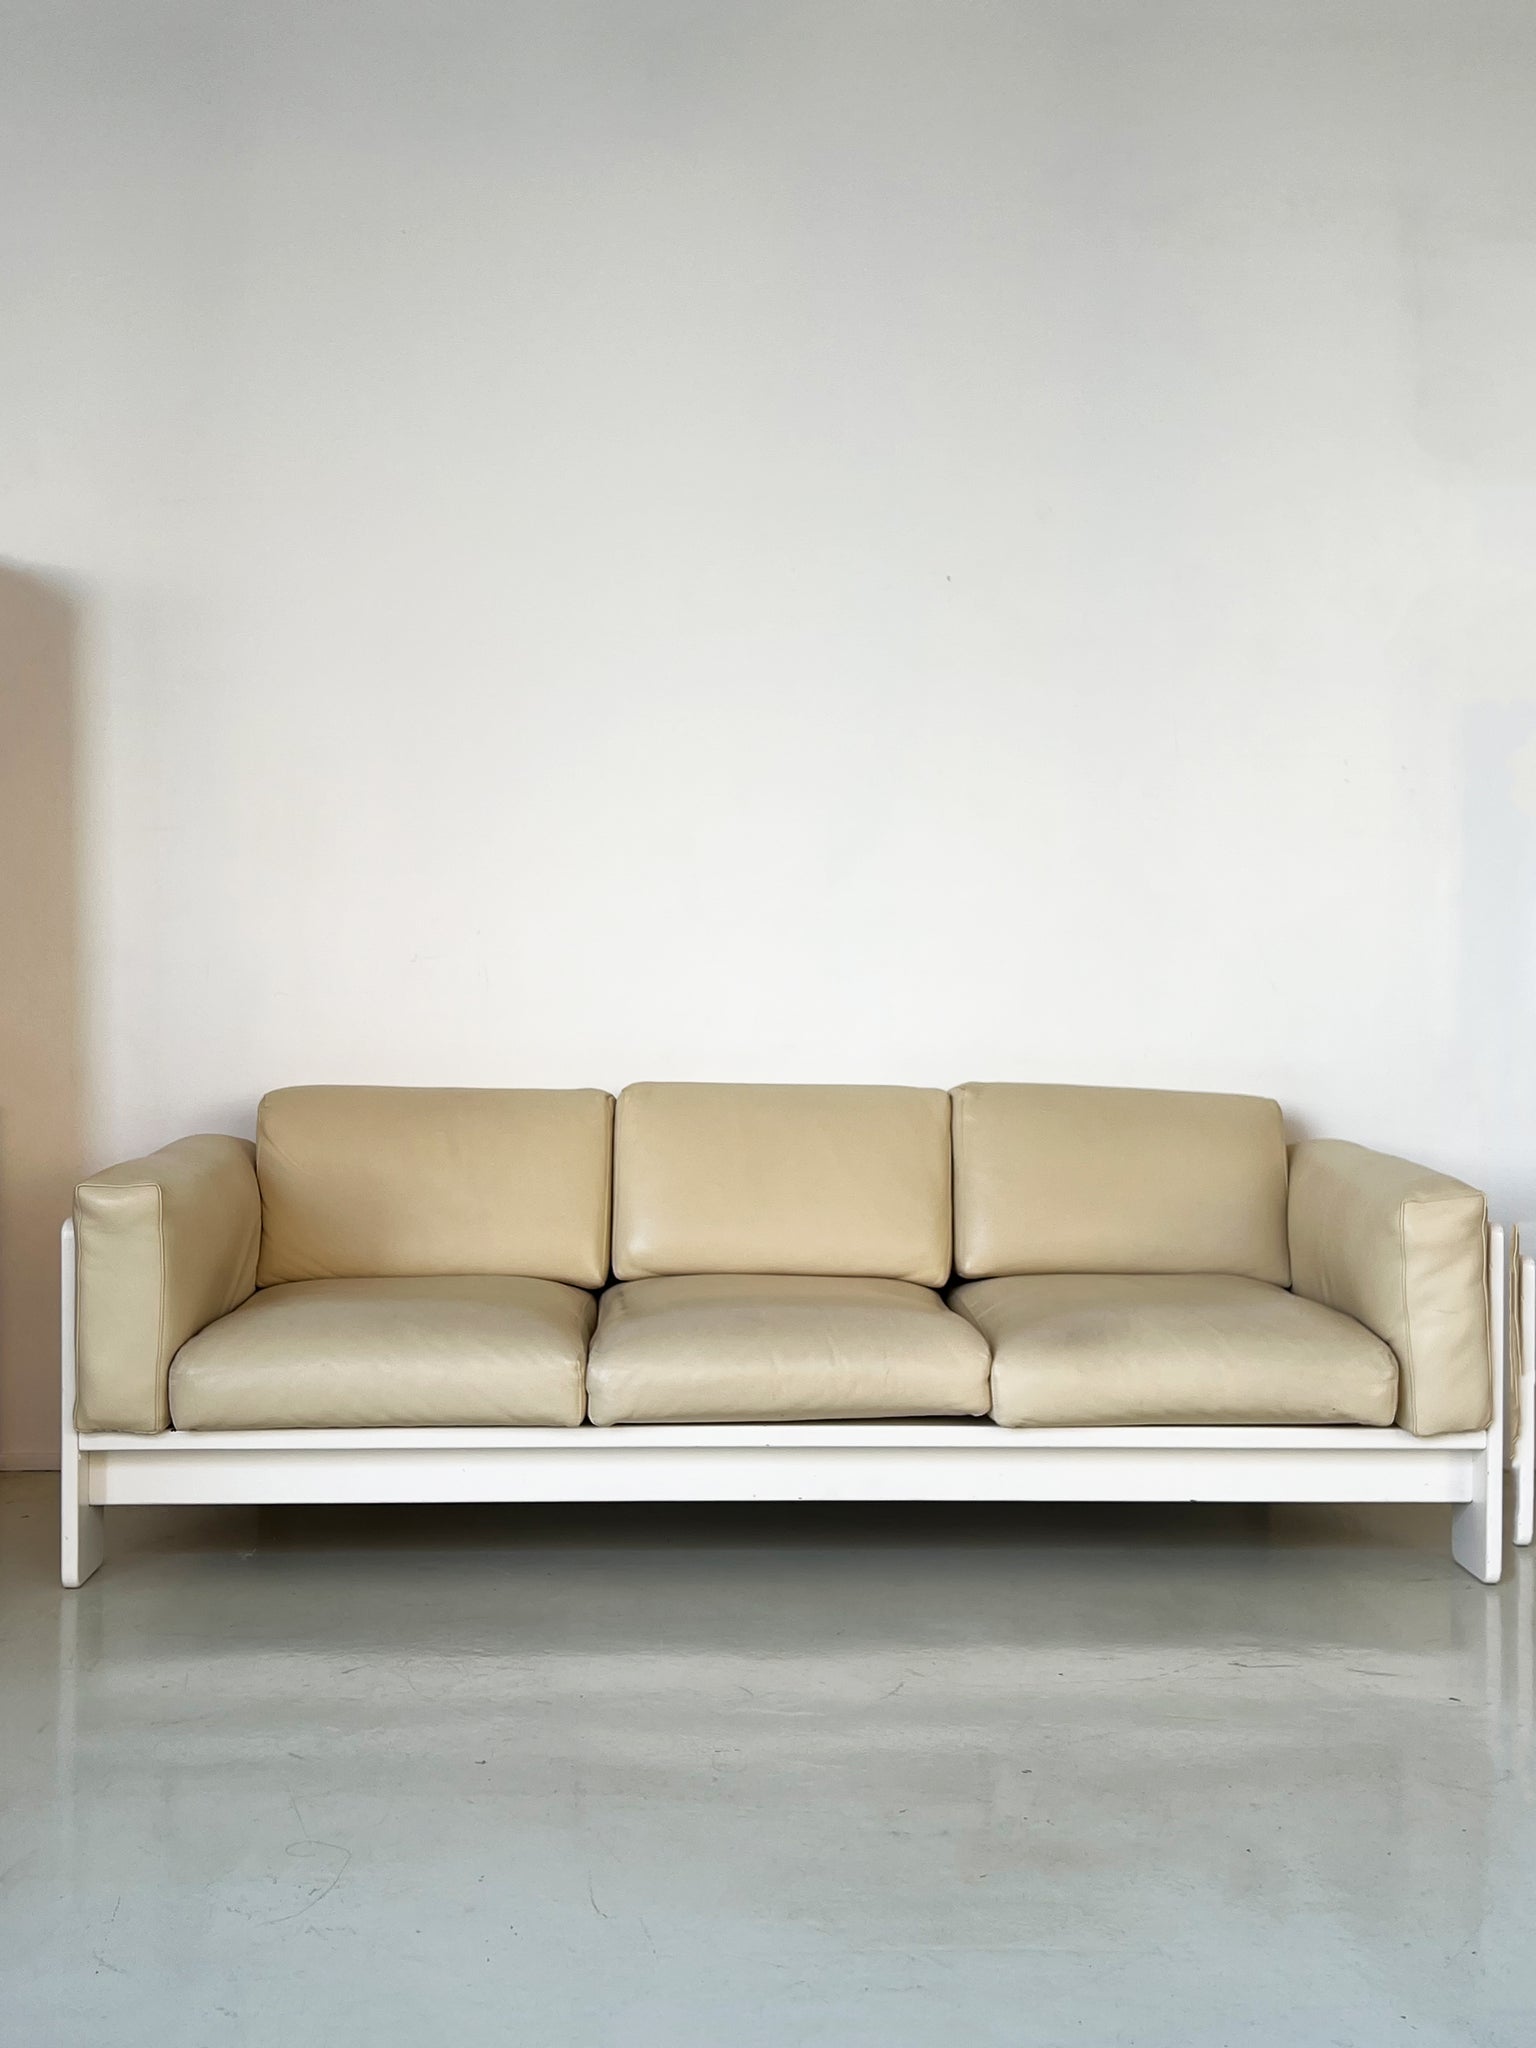 Vintage Tobia Scarpa Butter Cream Leather Bastiano Sofa for Knoll